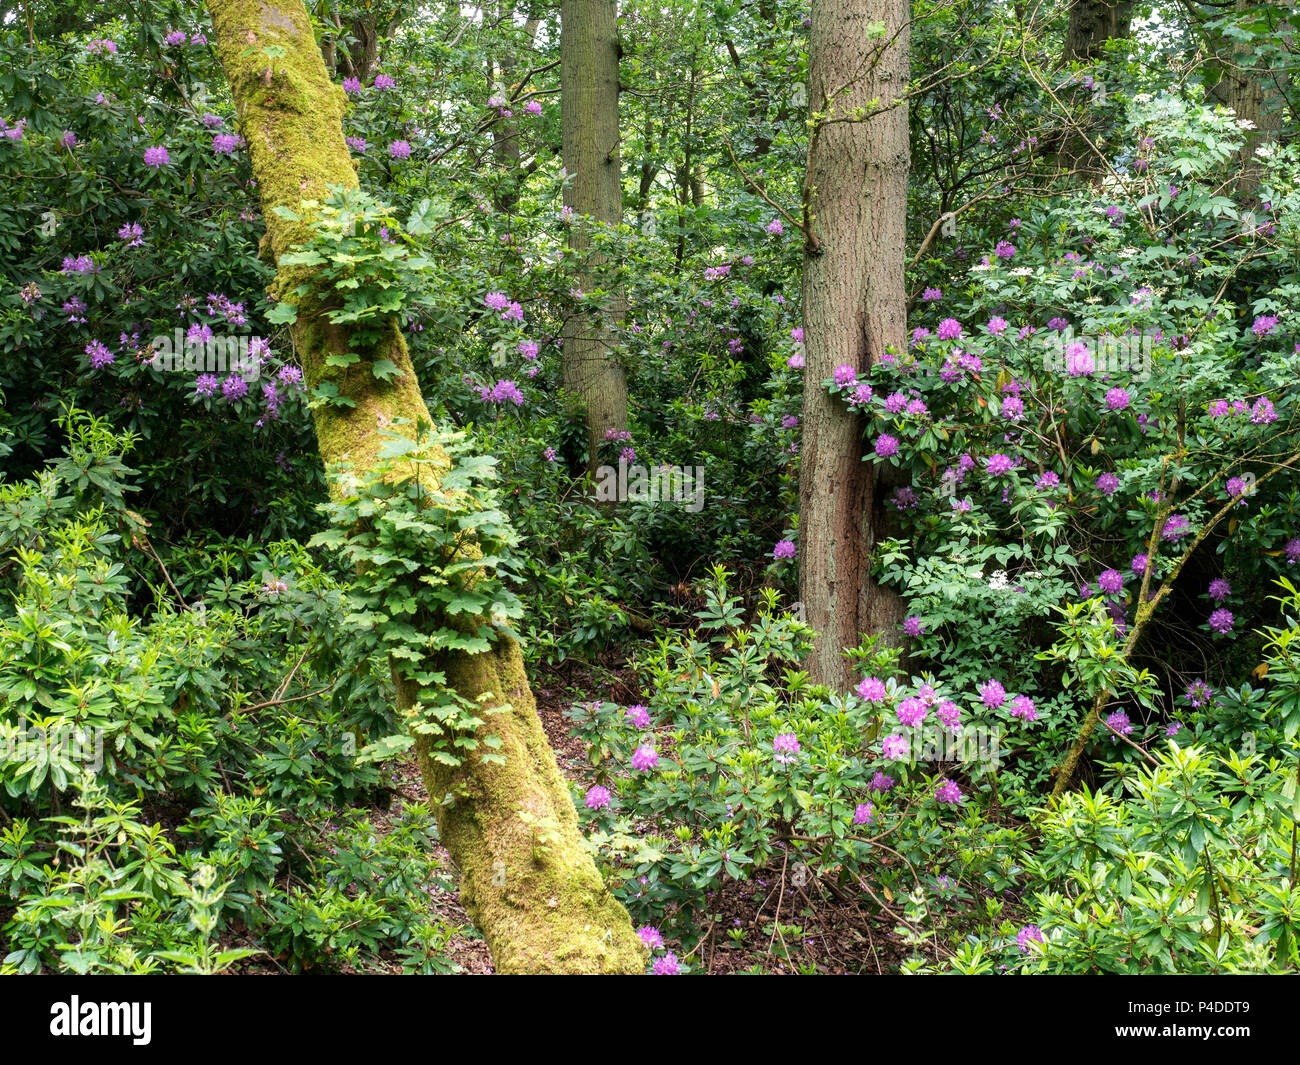 Rhododendrons in flower in Spring Wood near Wath in Nidderdale Yorkshire England Stock Photo